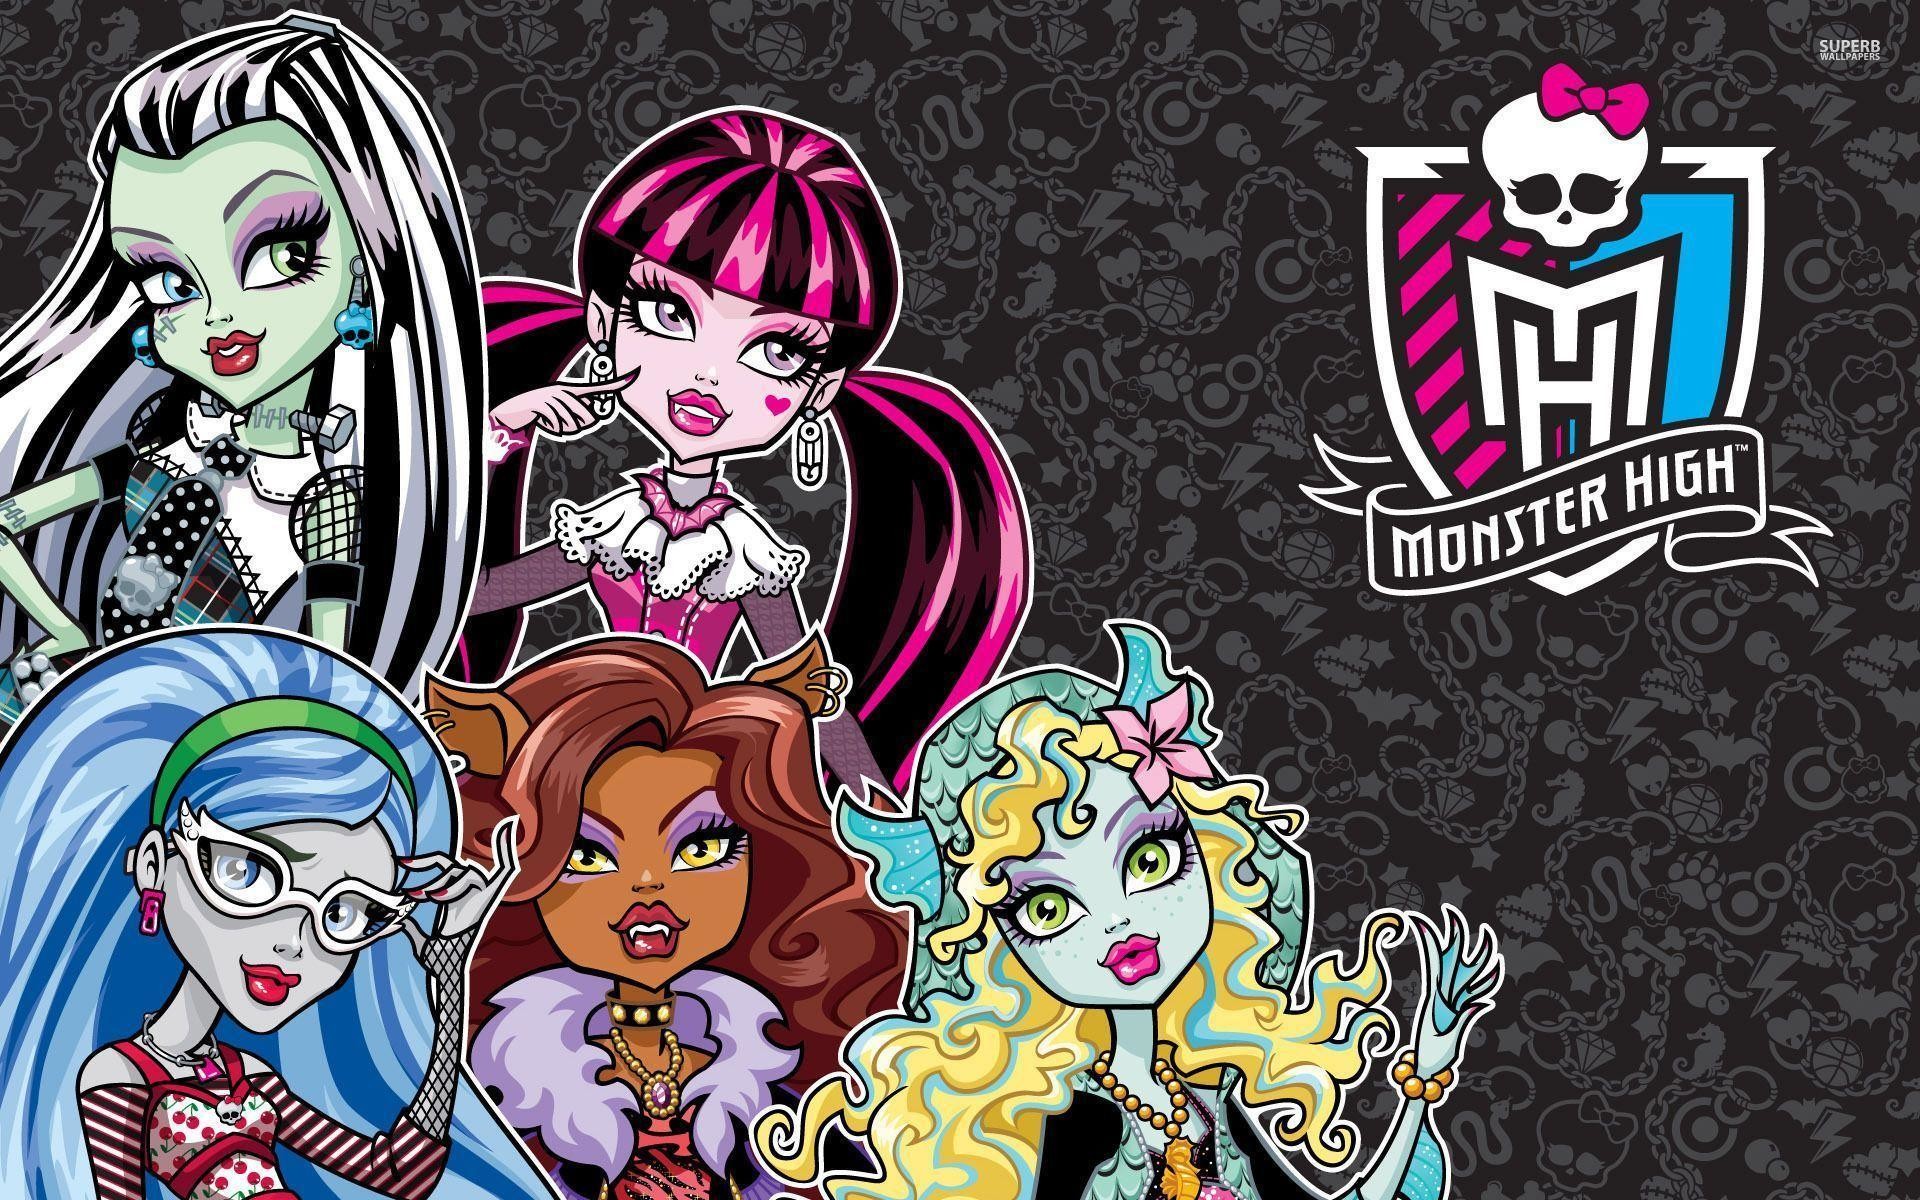 HD Wallpapers  Backgrounds for Monster High by Tran Van Long